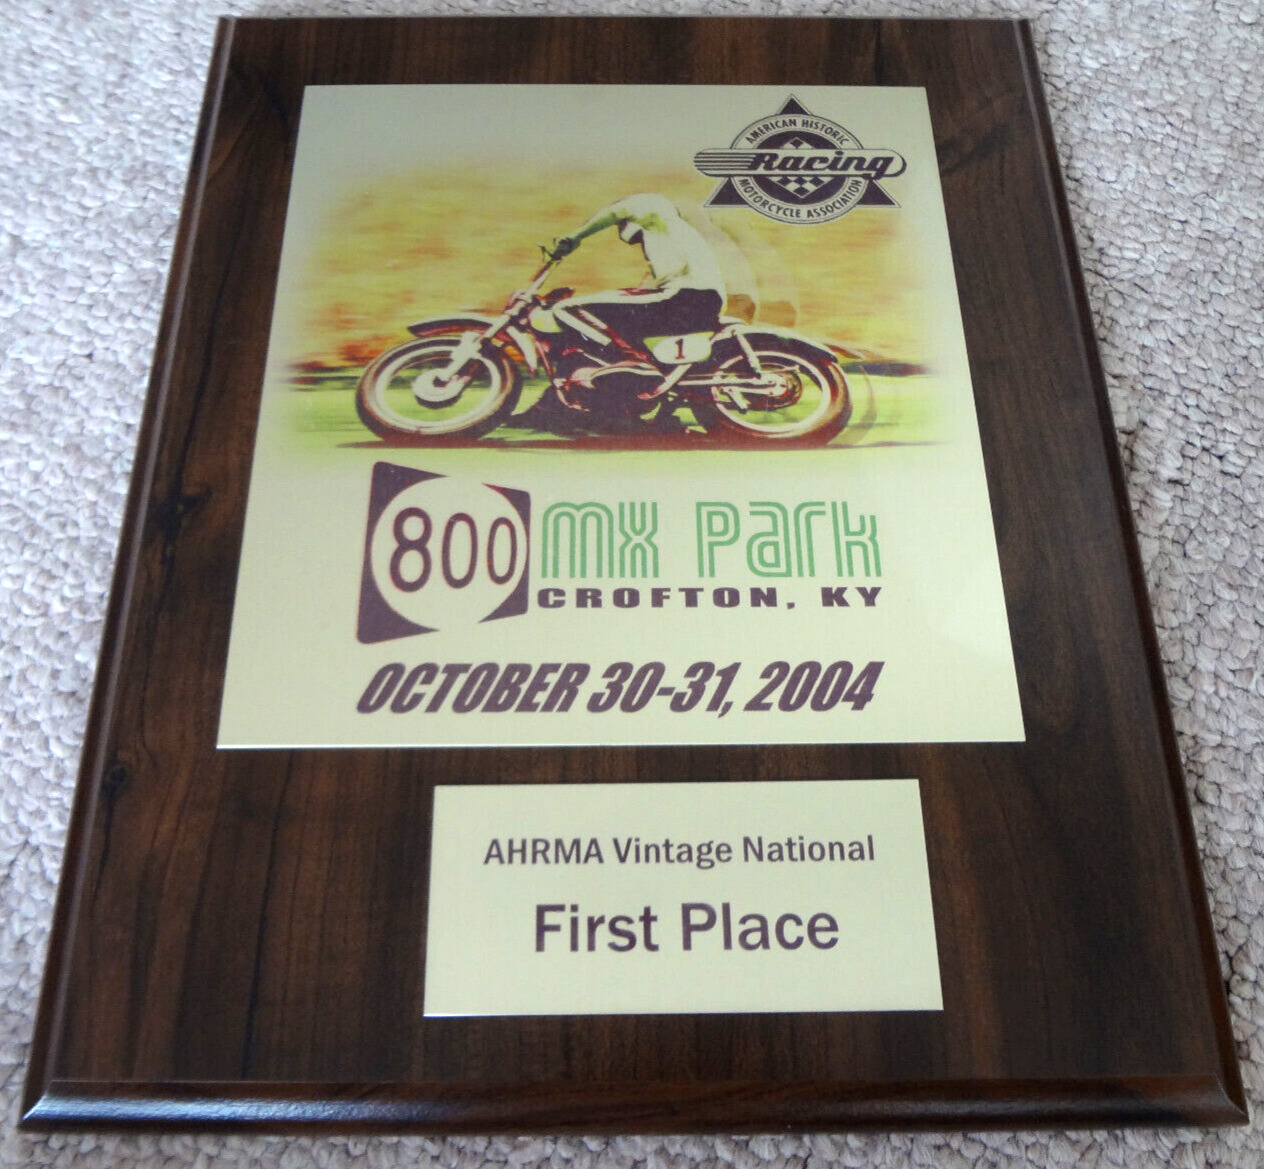 AHRMA VINTAGE NATIONAL MOTORCYCLE TROPHY AWARD PLAQUE HIGH POINT CROFTON KY 2004